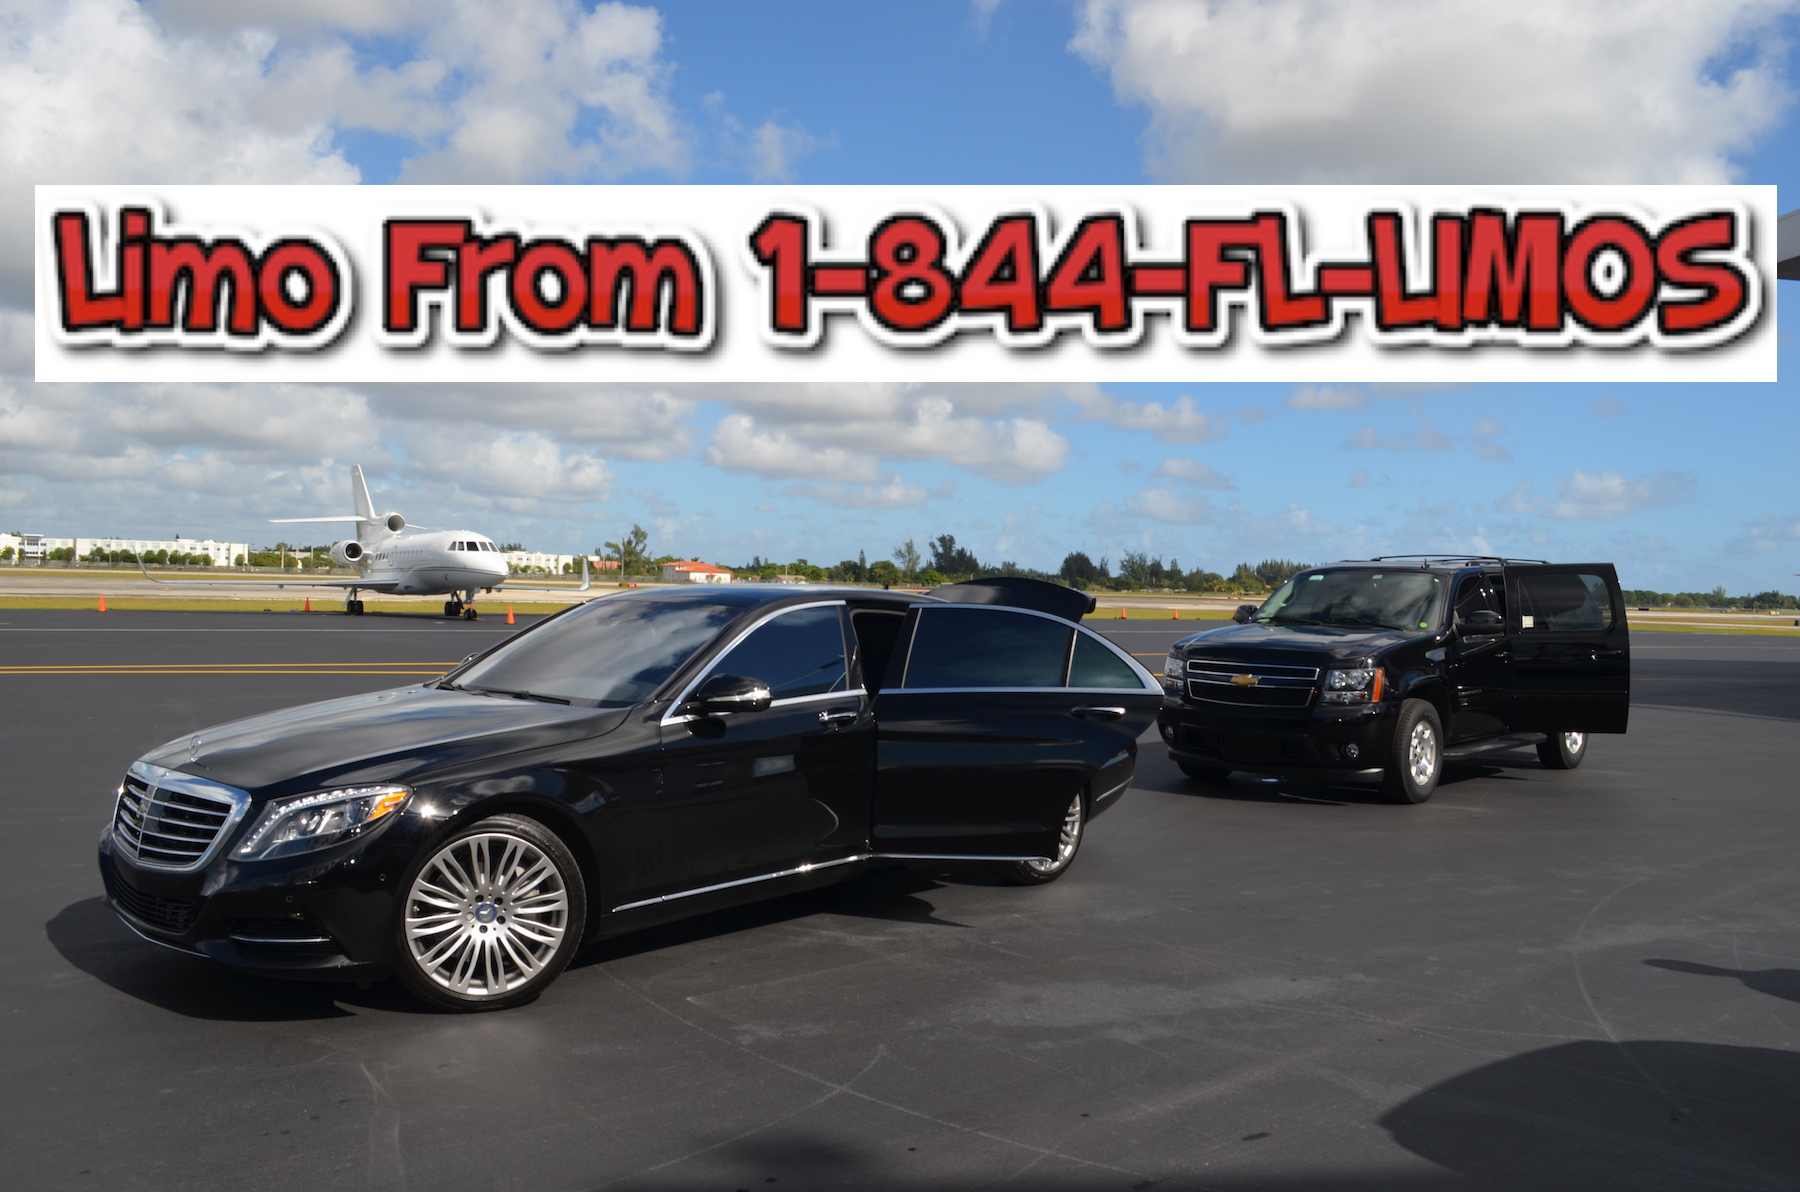 The new model year 2015 Mercedes-Benz S550  Limousine are here in FT LAUDERDALW,FL